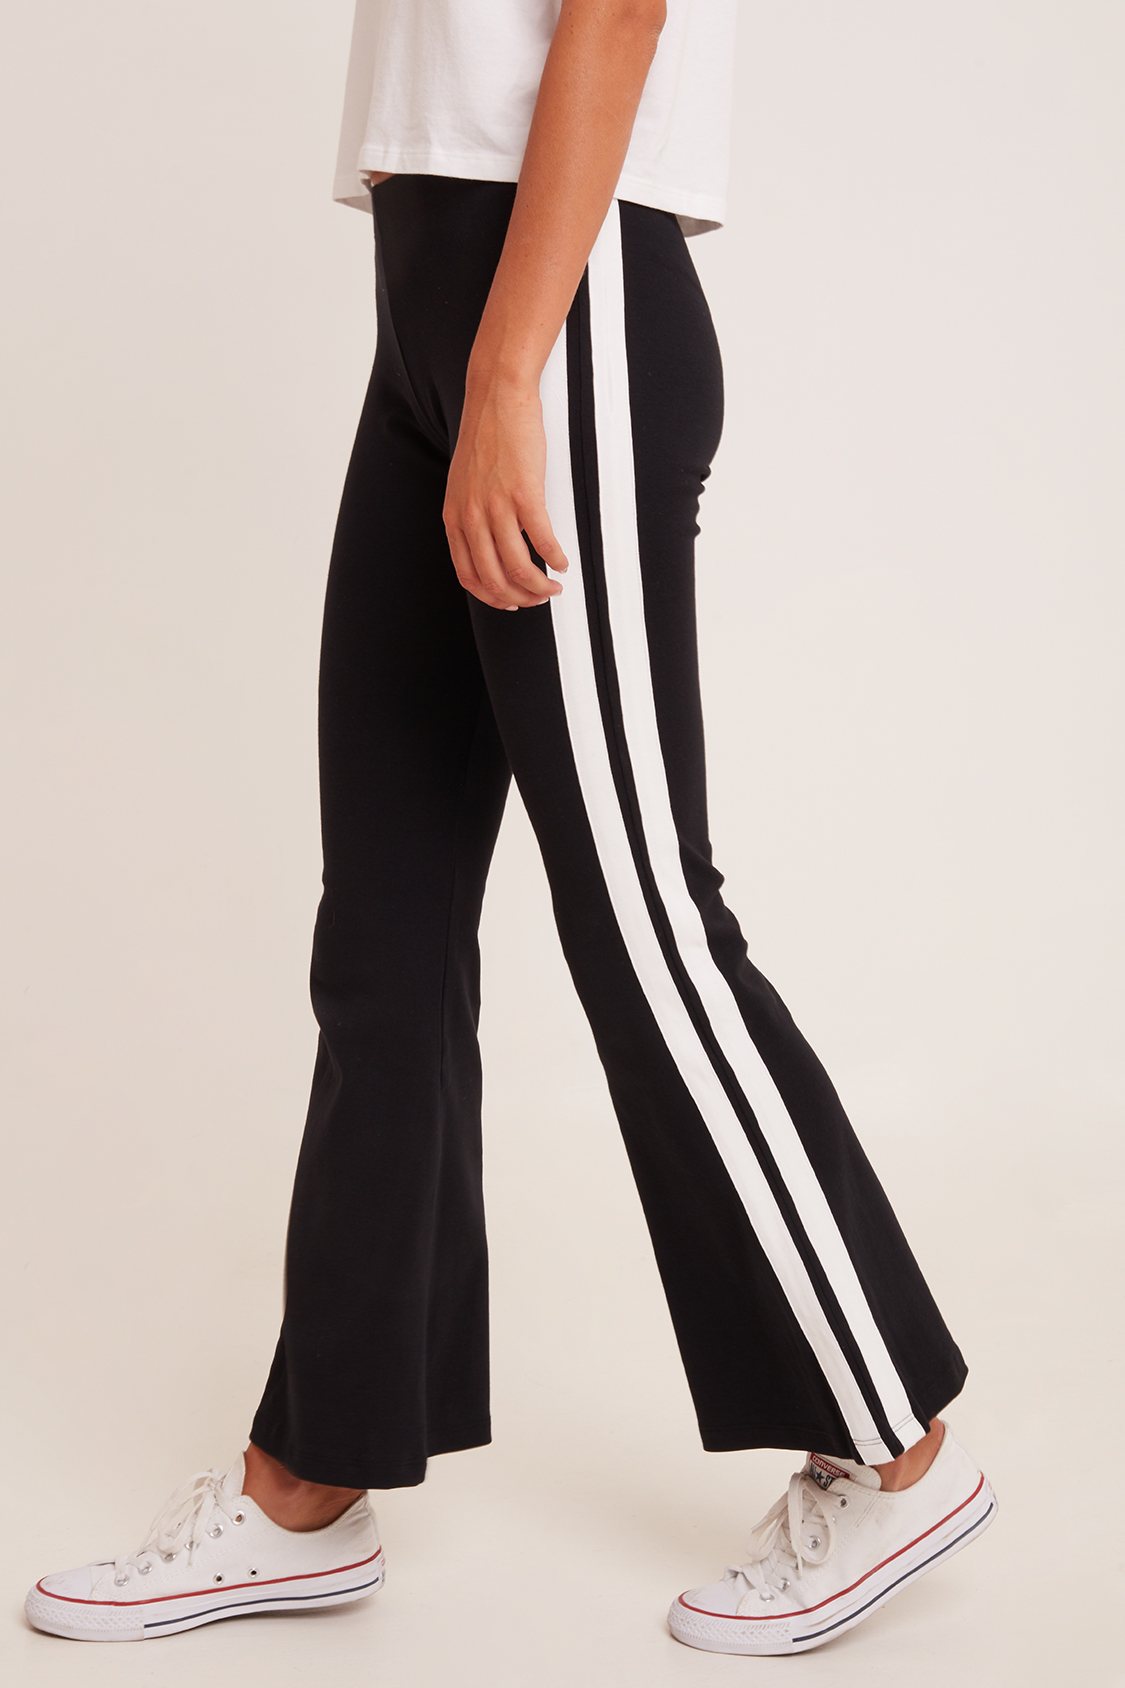 Sporty flared pants